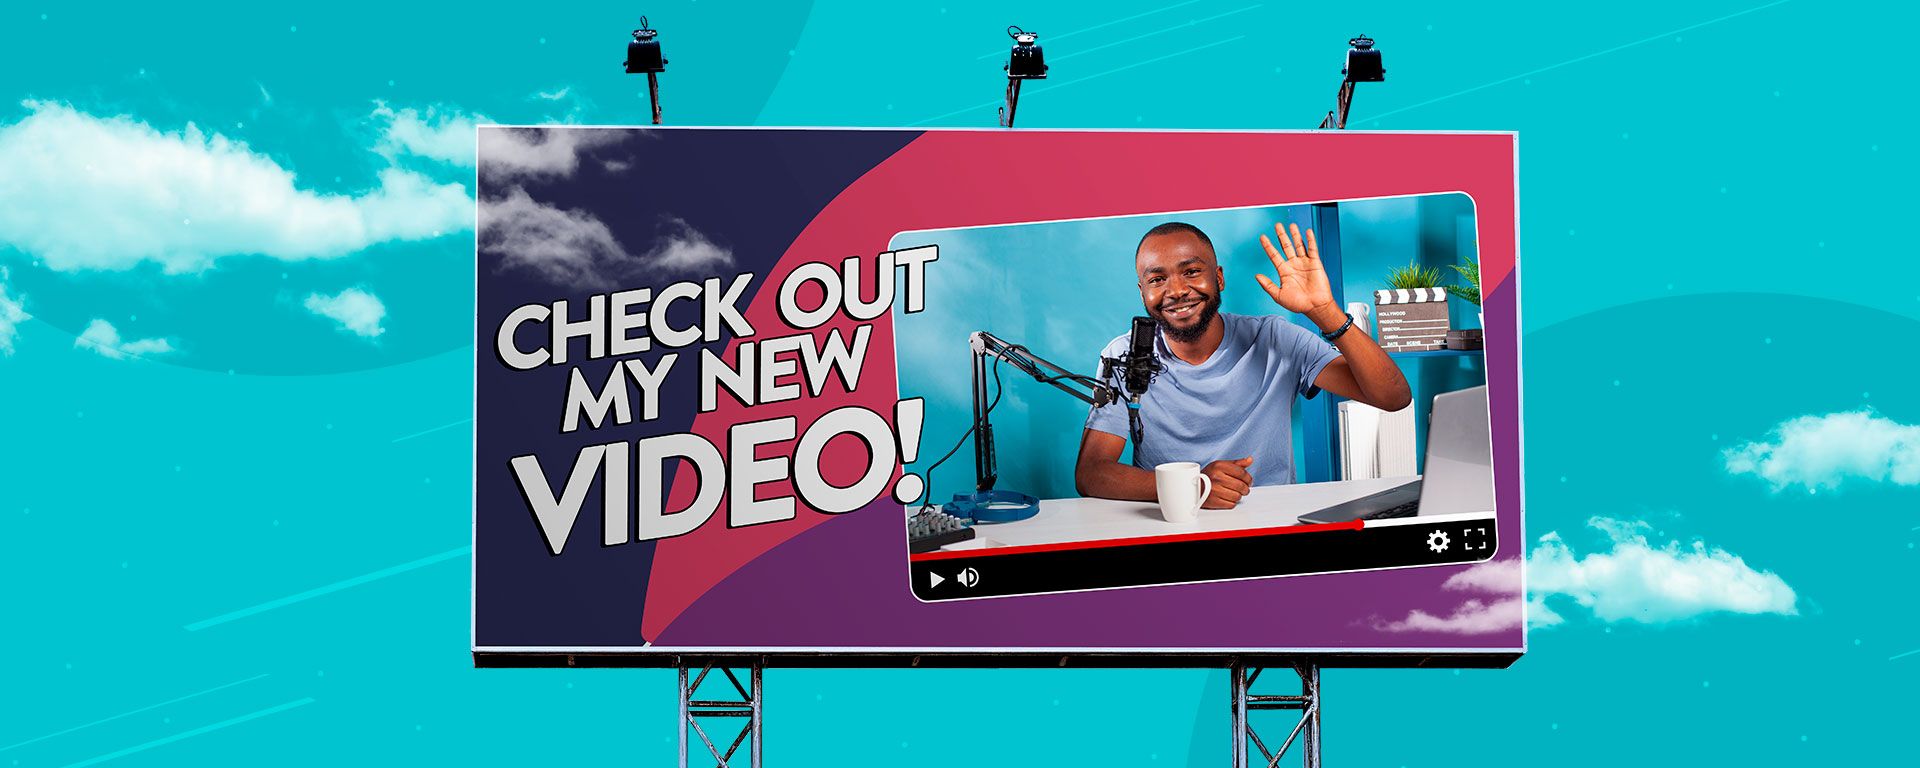 Illustration of a YouTube video being promoted on a billboard.